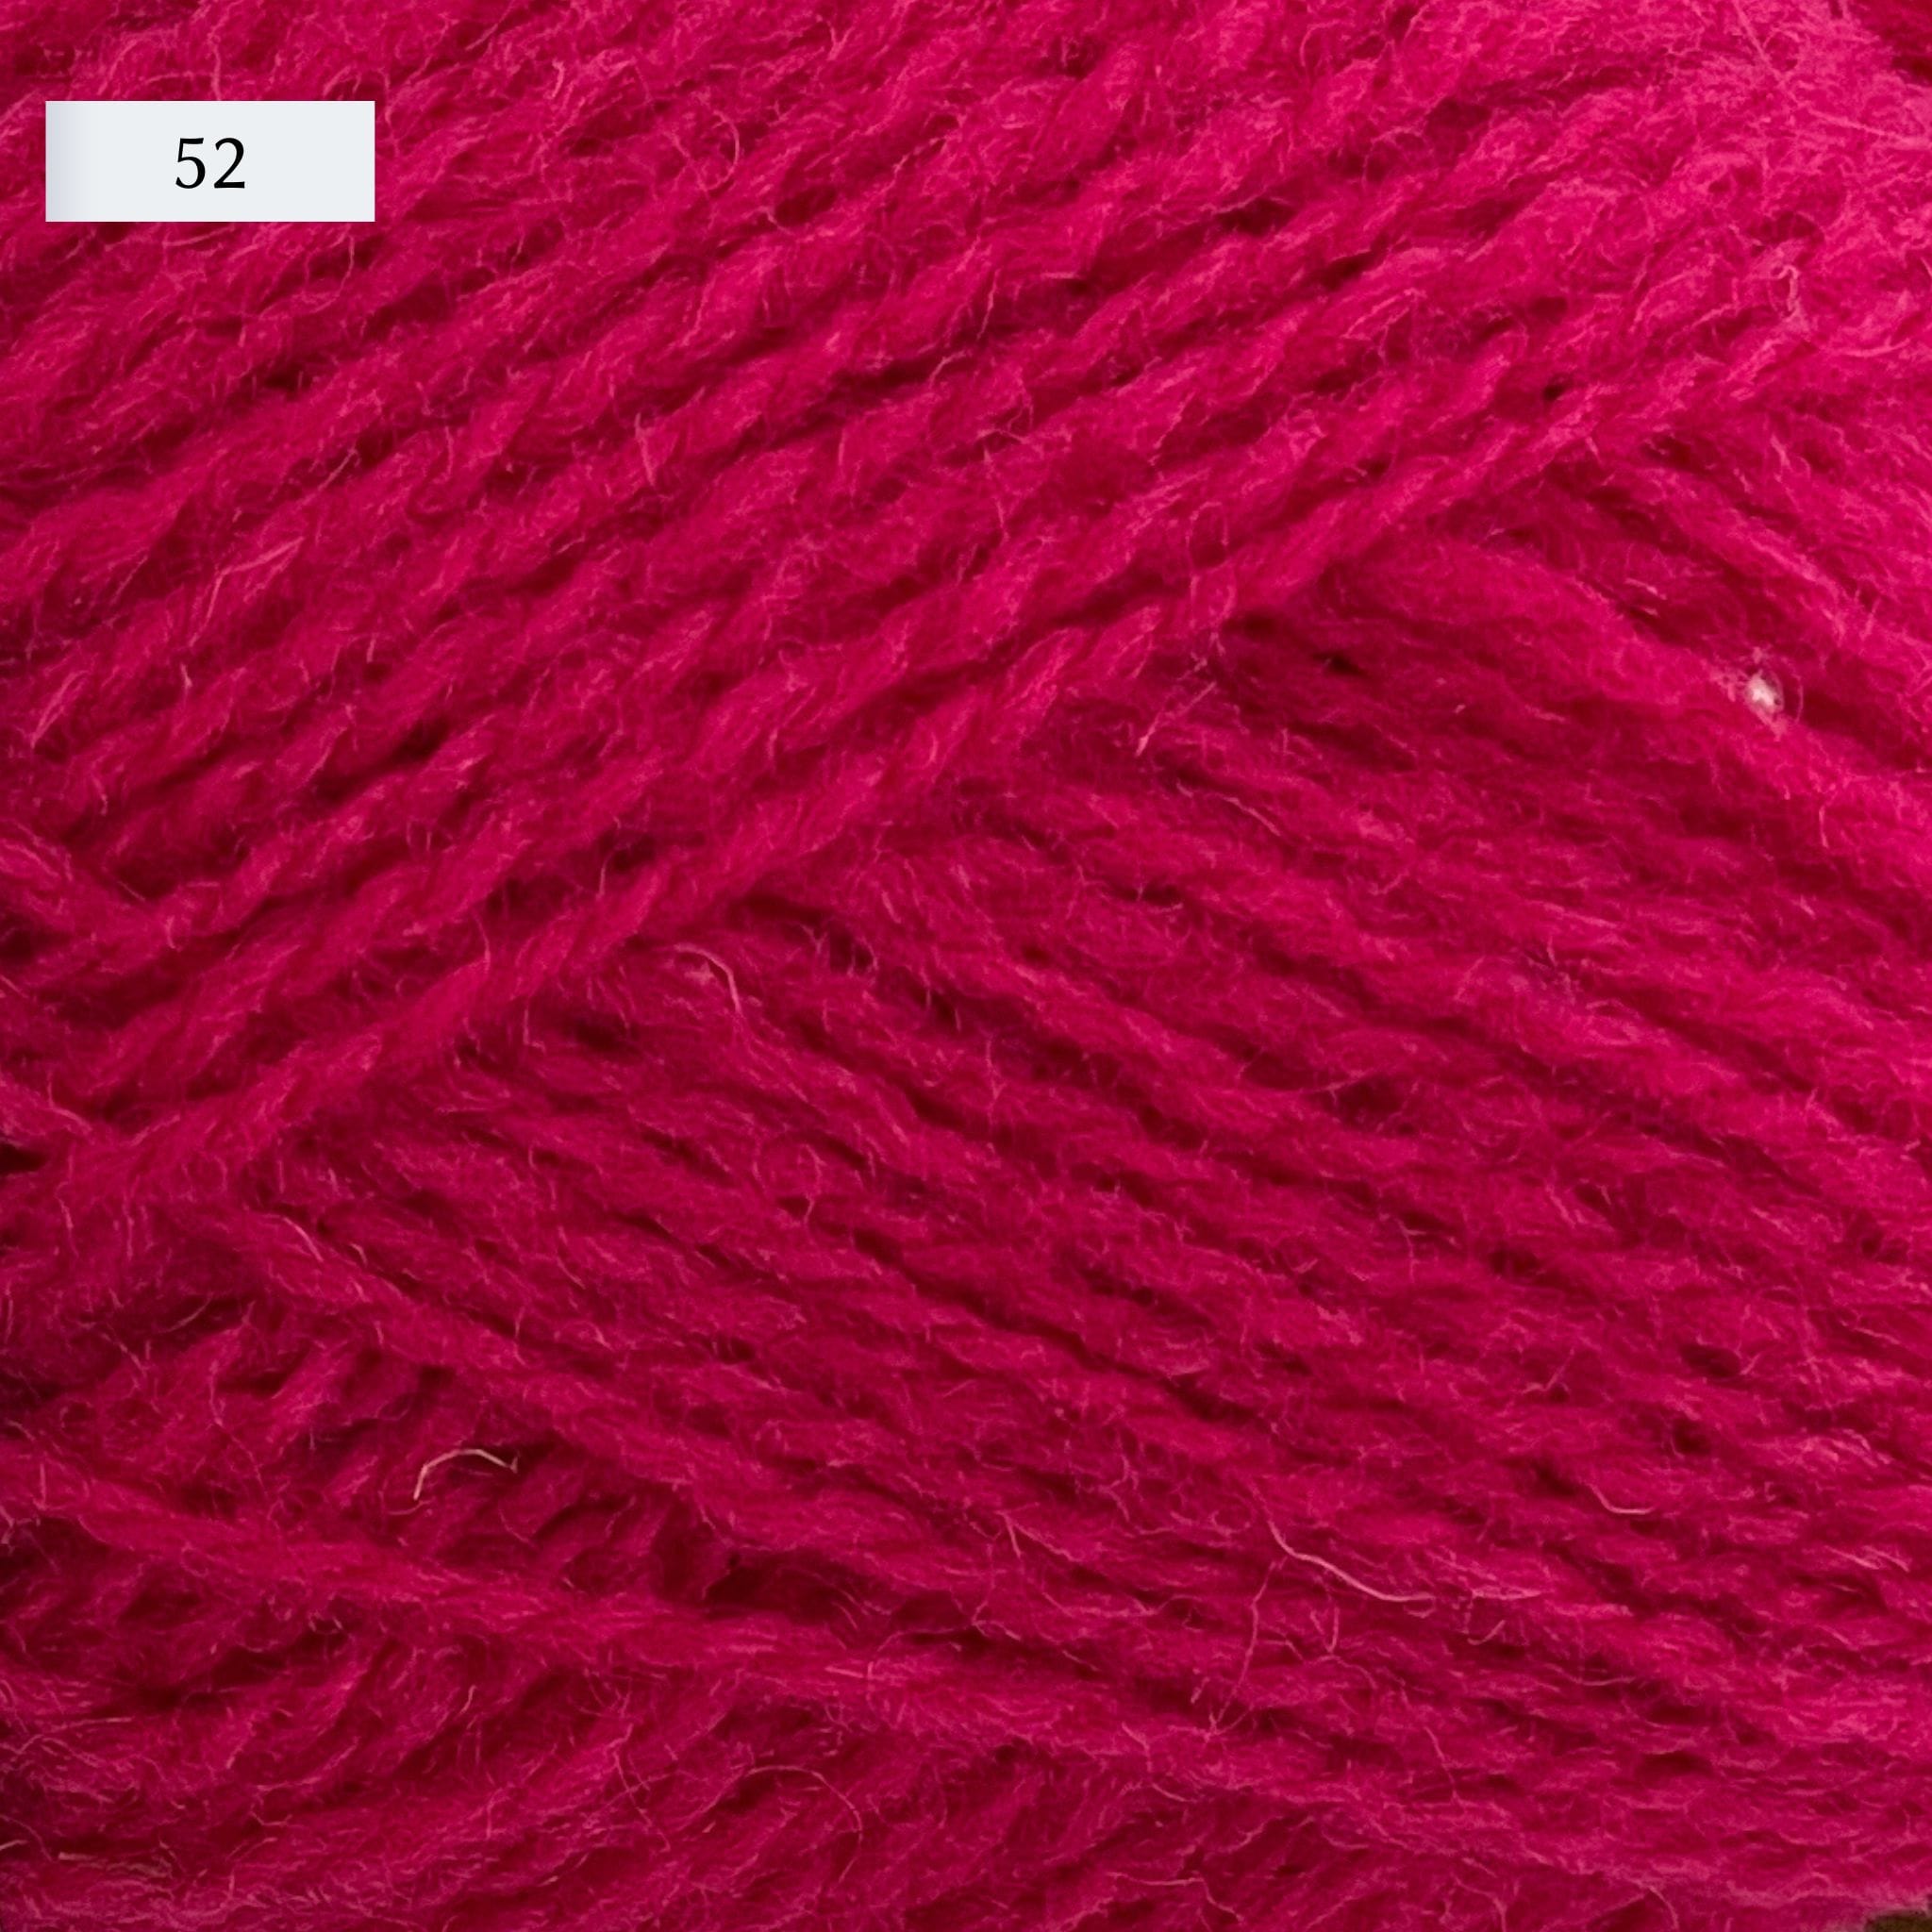 Jamieson & Smith 2ply Jumper Weight, light fingering weight yarn, in color 52, hot fuschia pink